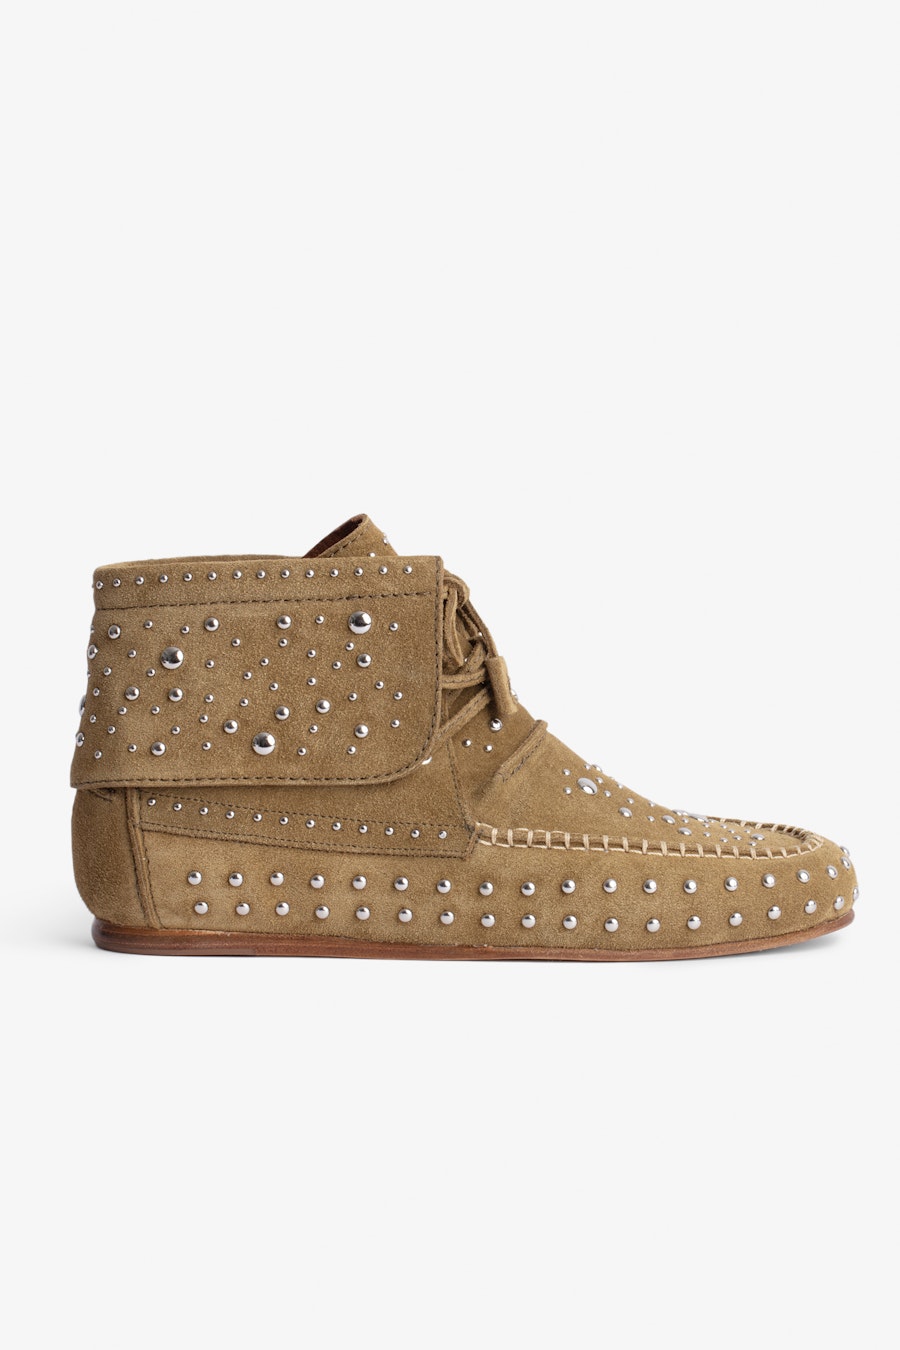 ZADIG&VOLTAIRE Santa Fe Dream Studs Ankle Boots